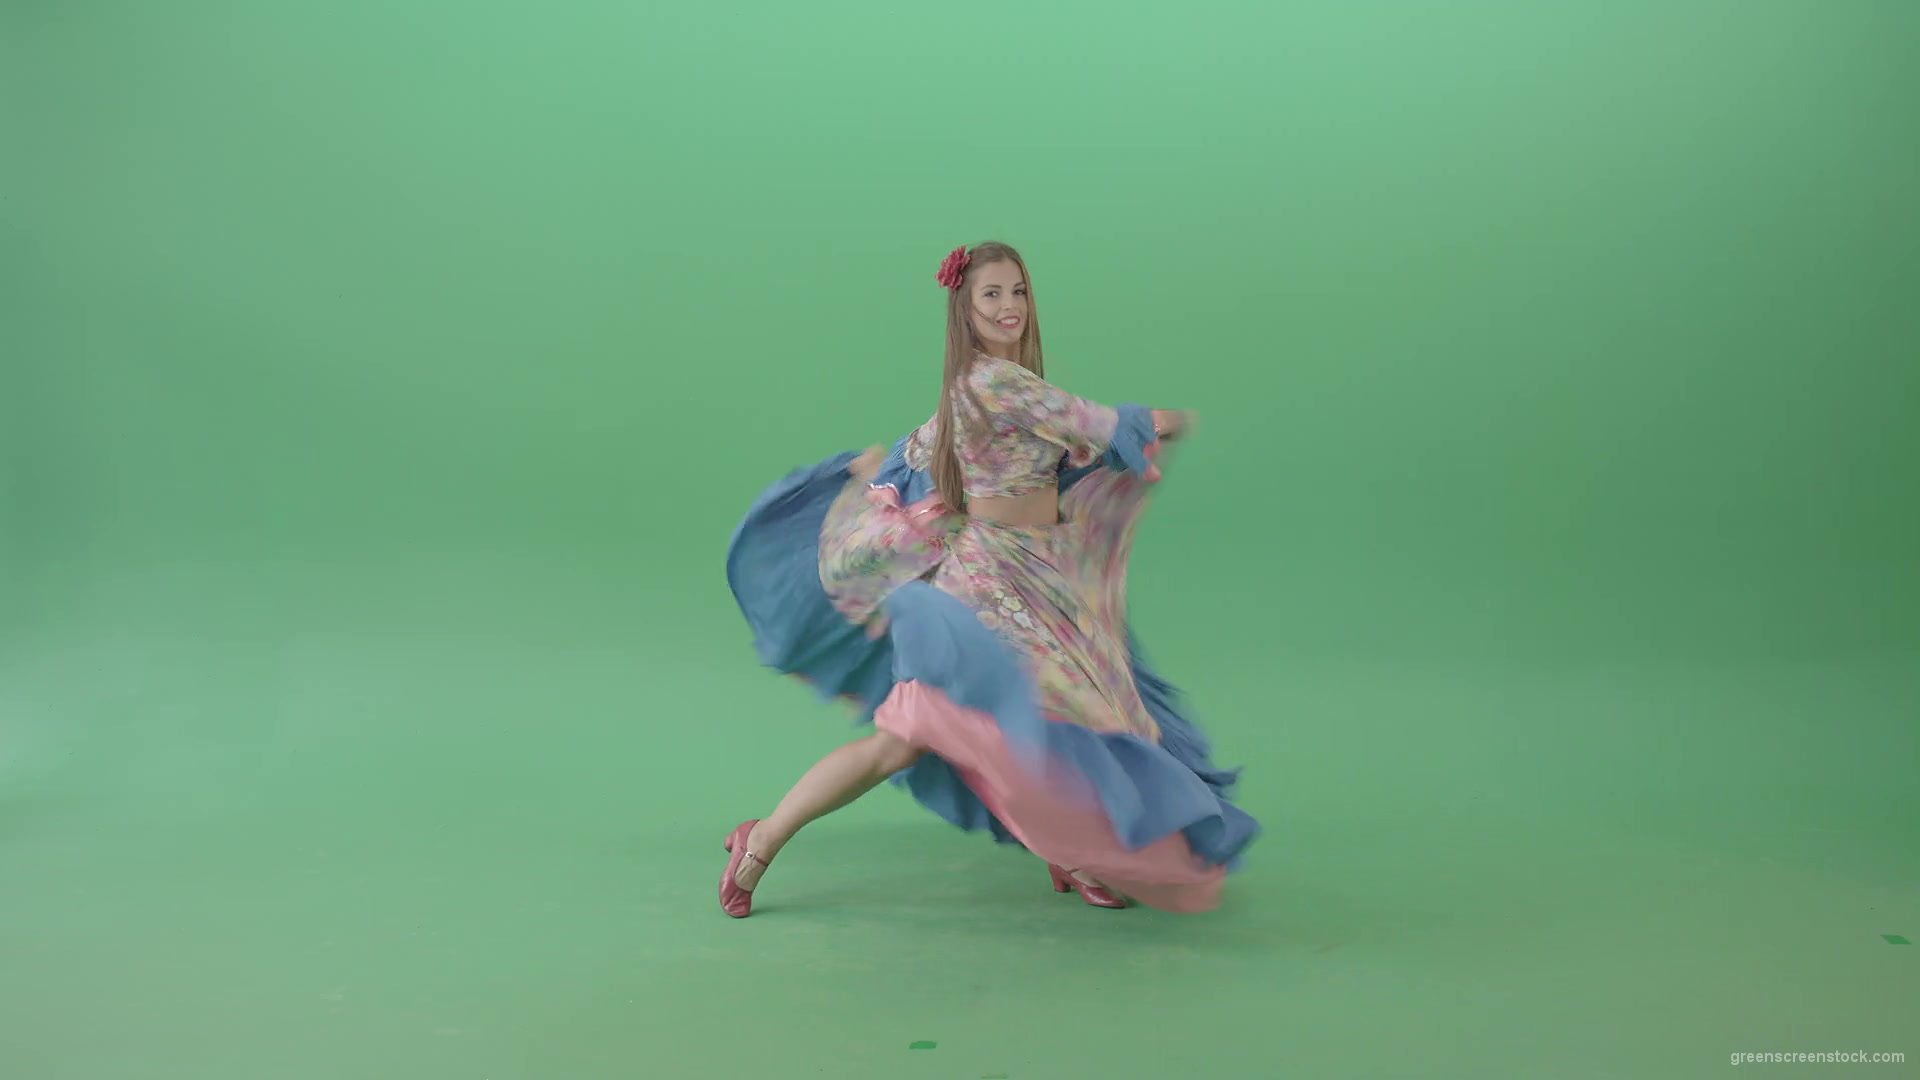 Roma-gipsy-woman-dancing-in-colorful-costume-isolated-on-Green-Screen-4K-Video-Footage-1920_004 Green Screen Stock